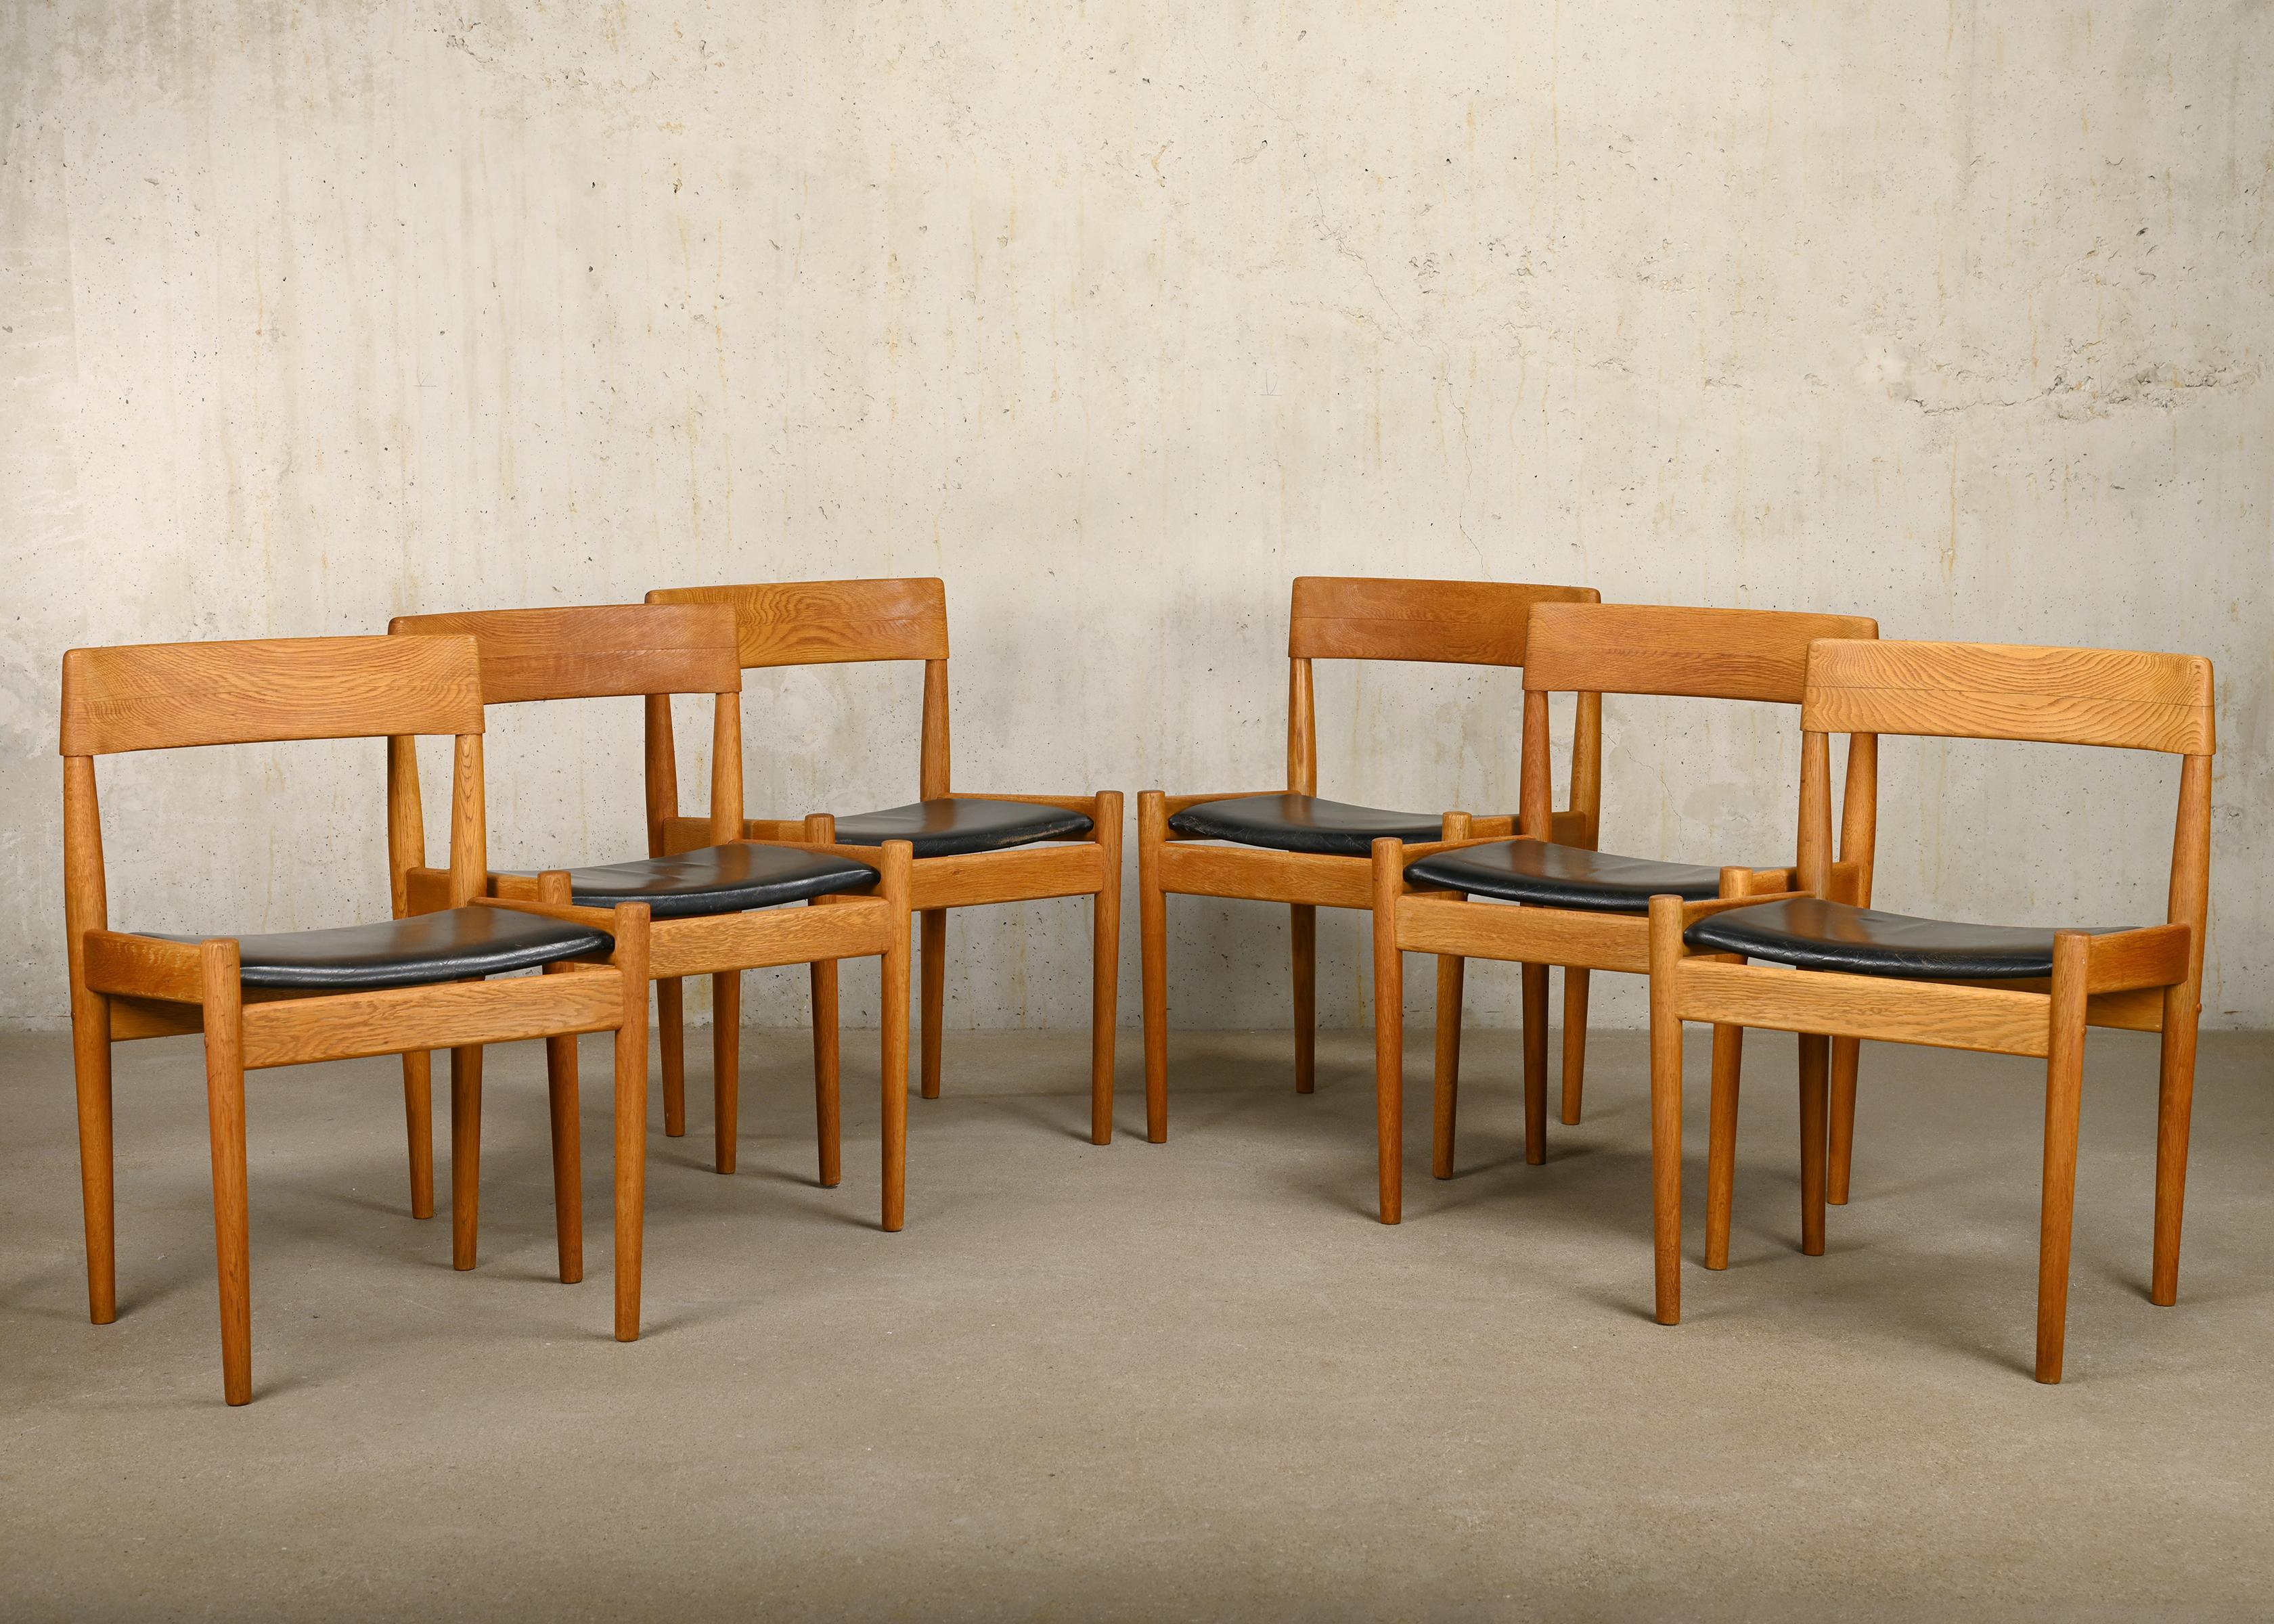 Set of 6 Dining Chairs designed by Grete Jalk model P J 3-2 for Poul Jeppesen Møbelfabrik, Denmark. Oak frames with black leather seats. The chairs are in good vintage condition with normal signs of wear and ageing.